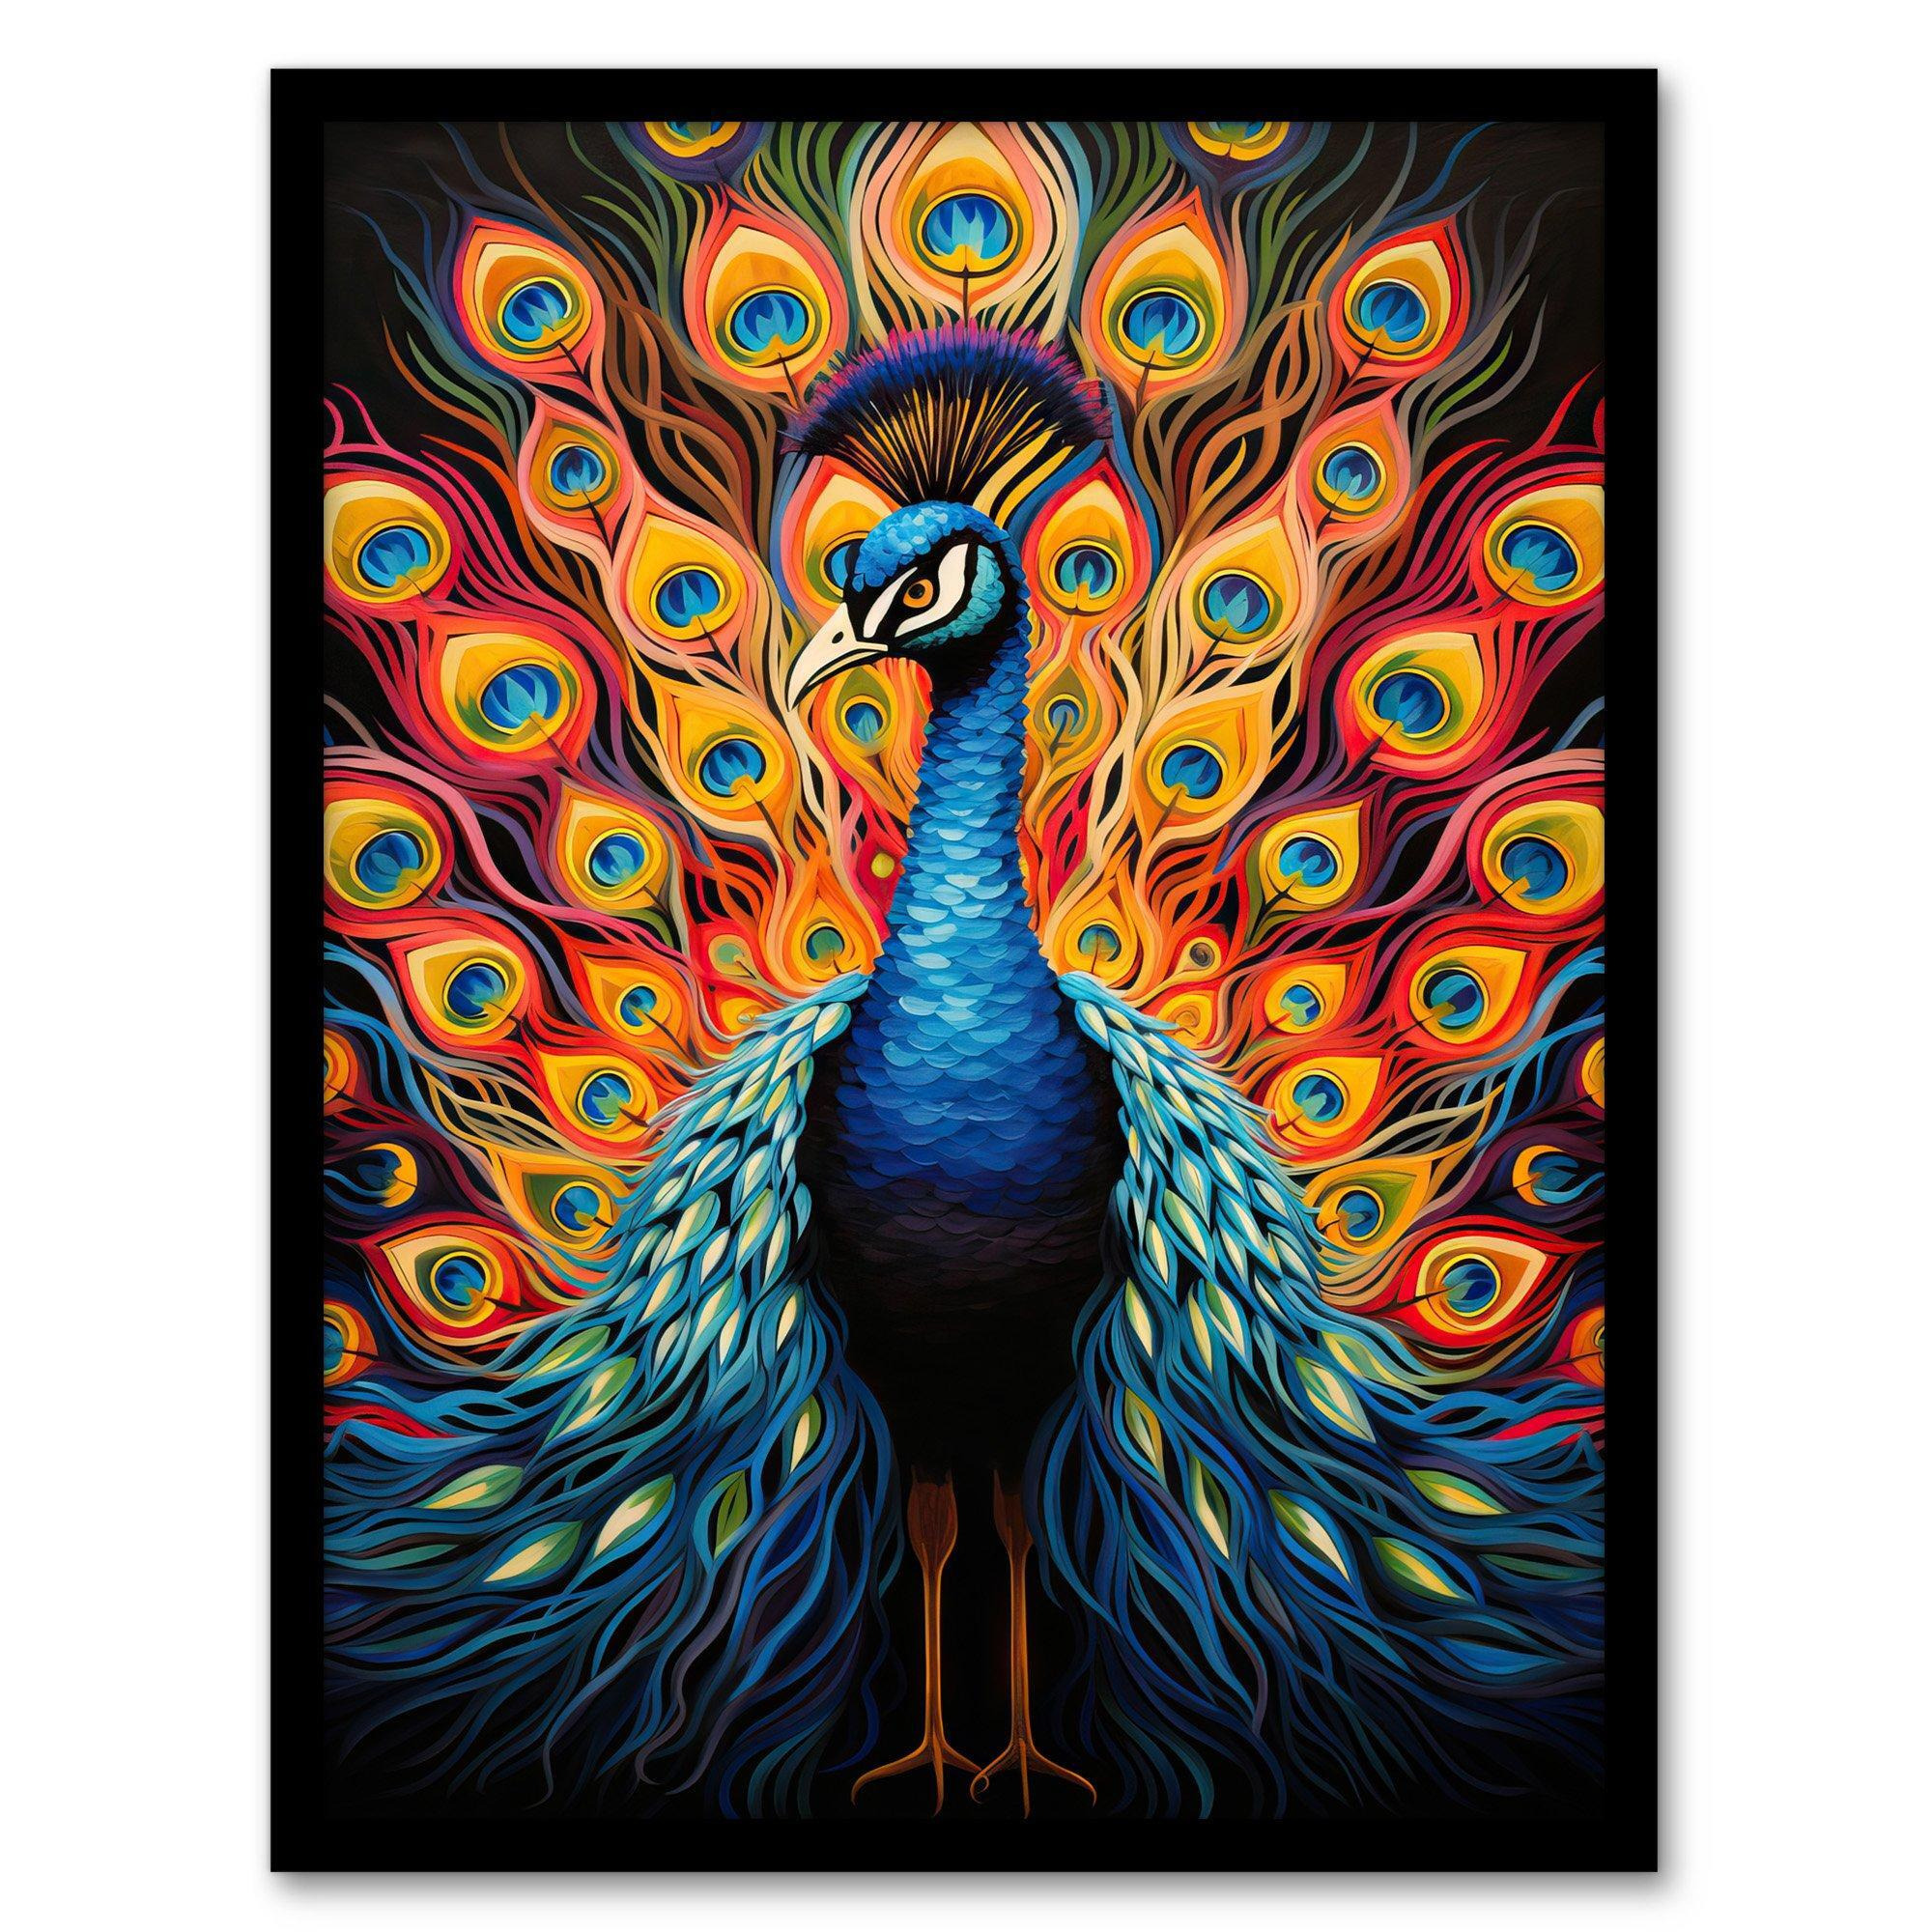 Peacock Bird With Bright Vivid Feathers Yellow Red Blue Bold Portrait Artwork Art Print Framed Poster Wall Decor - image 1